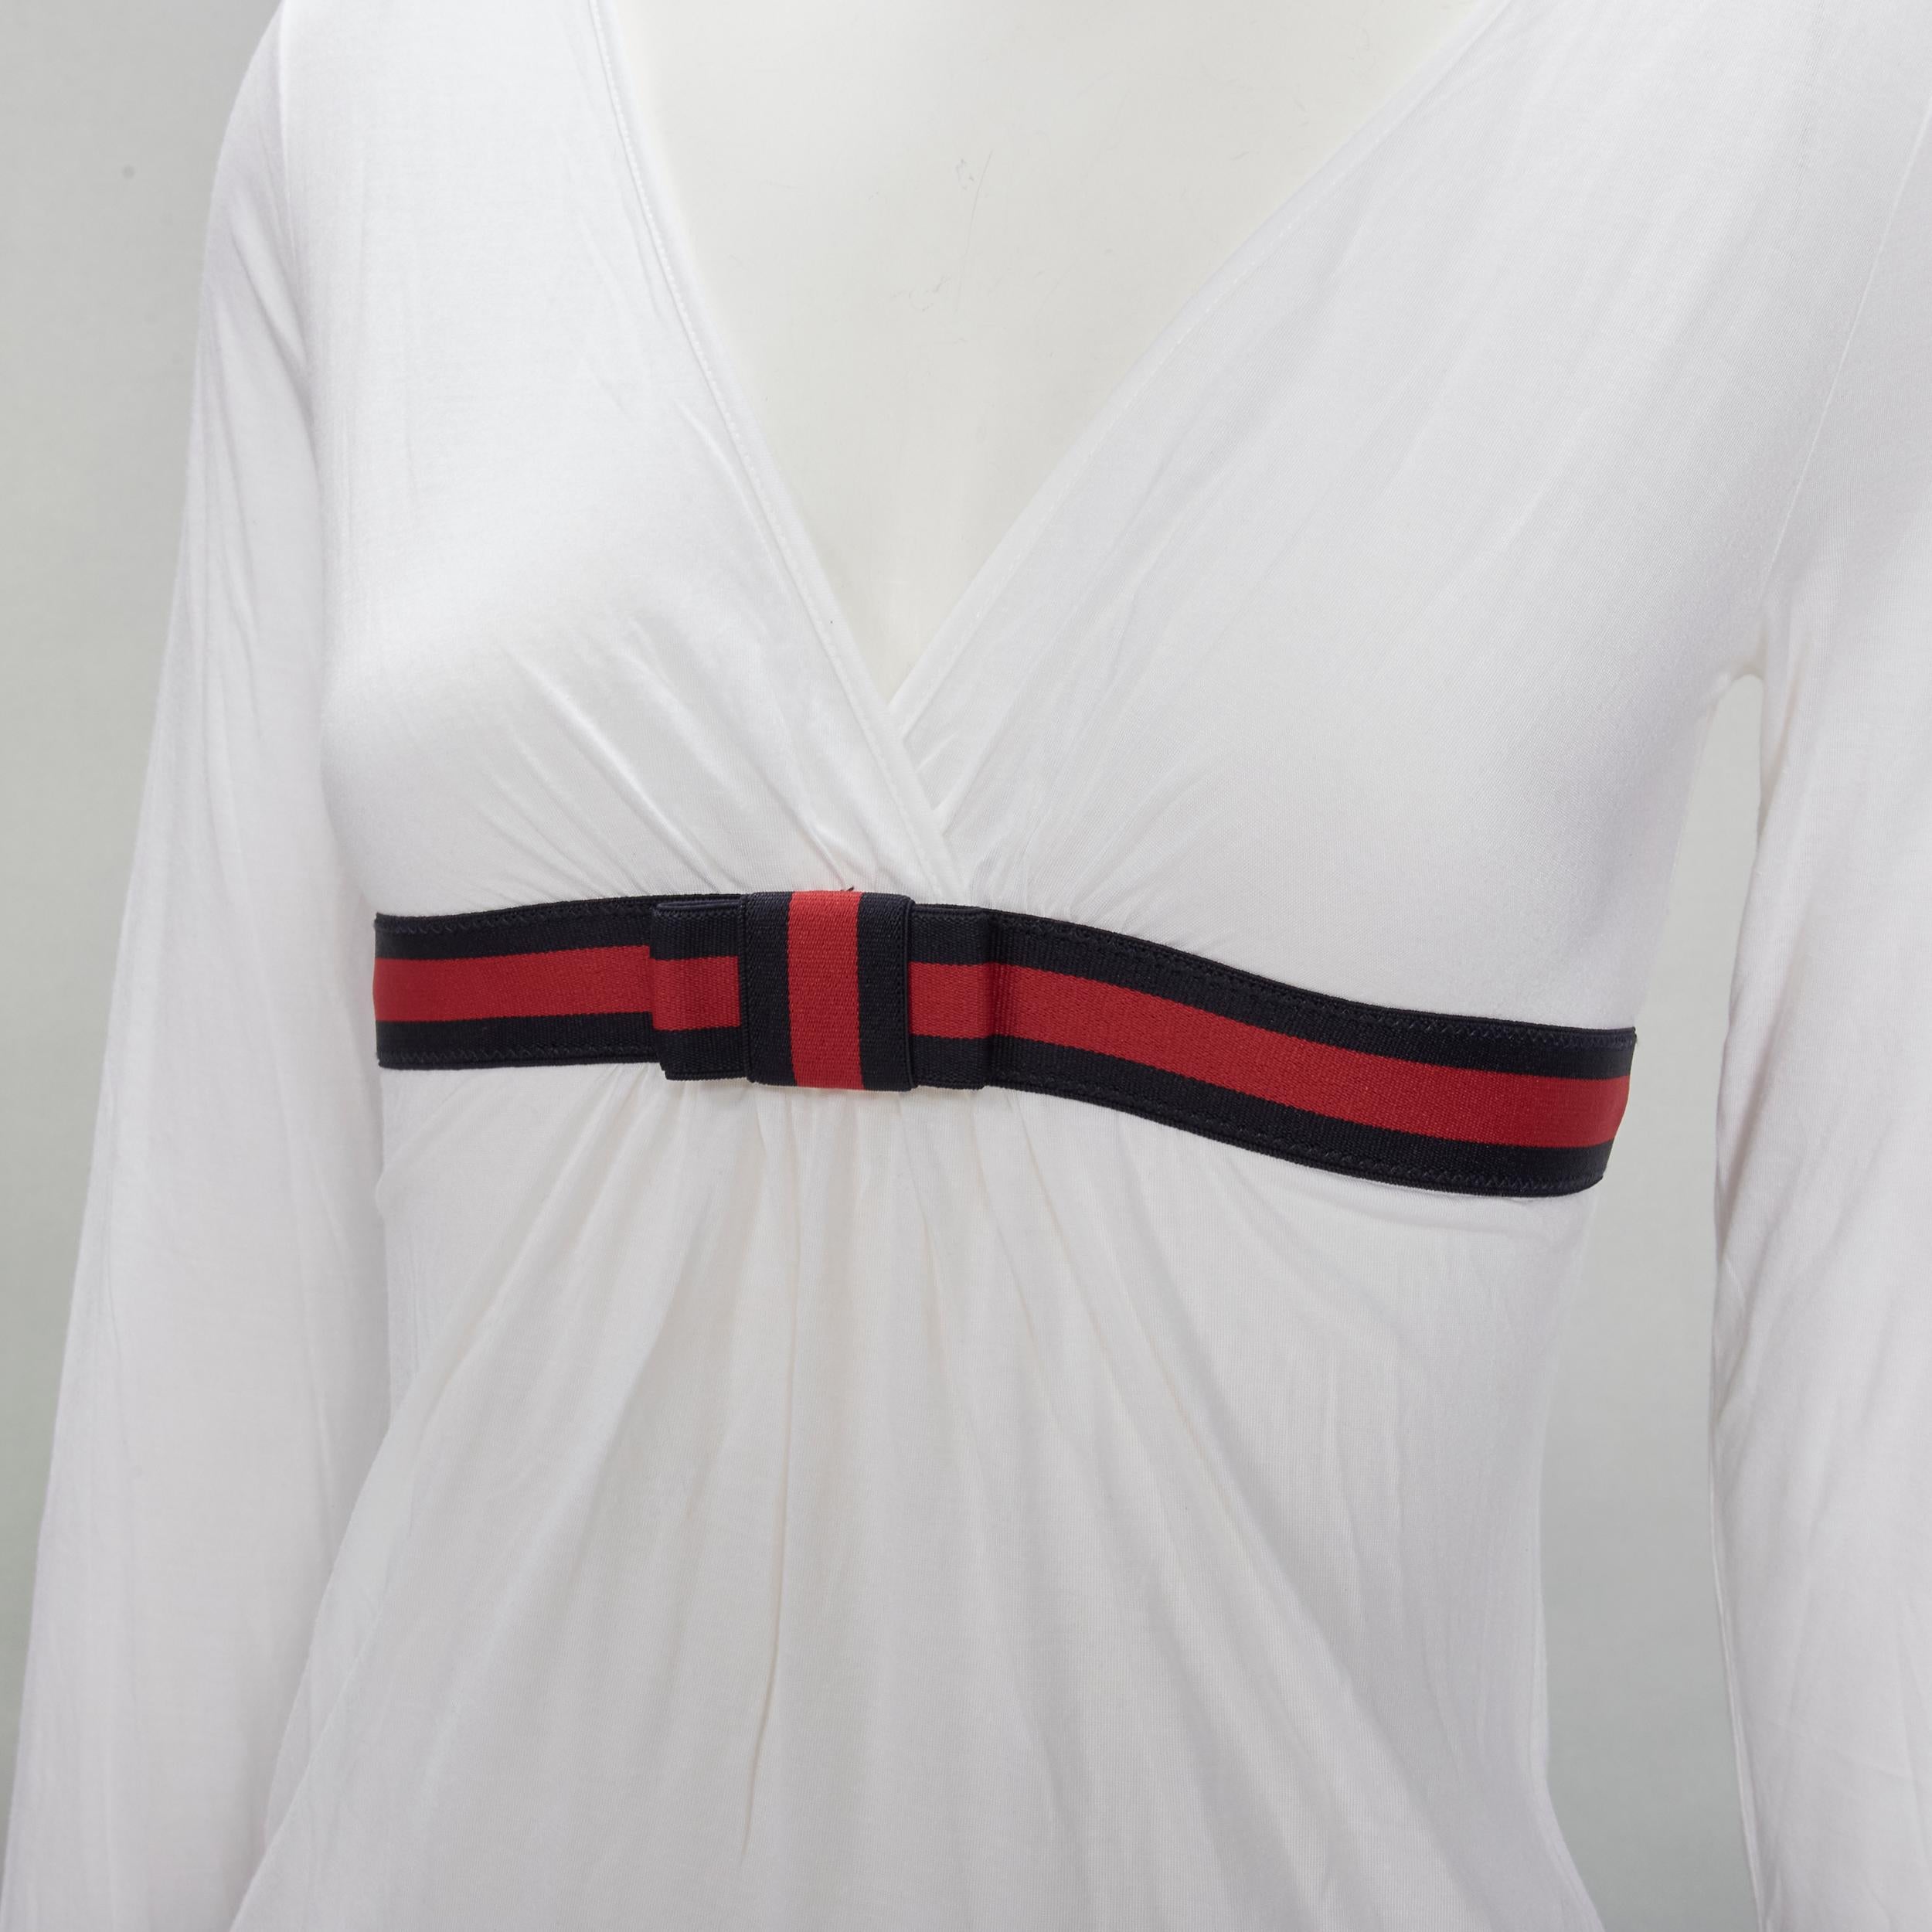 GUCCI VINtage white soft cotton navy red Web ribbon trim top XS
Brand: Gucci
Material: Feels like cotton
Color: White
Pattern: Solid
Extra Detail: V-neck. Grosgrain web bow ribbon trim.
Made in: Italy

CONDITION:
Condition: Excellent, this item was